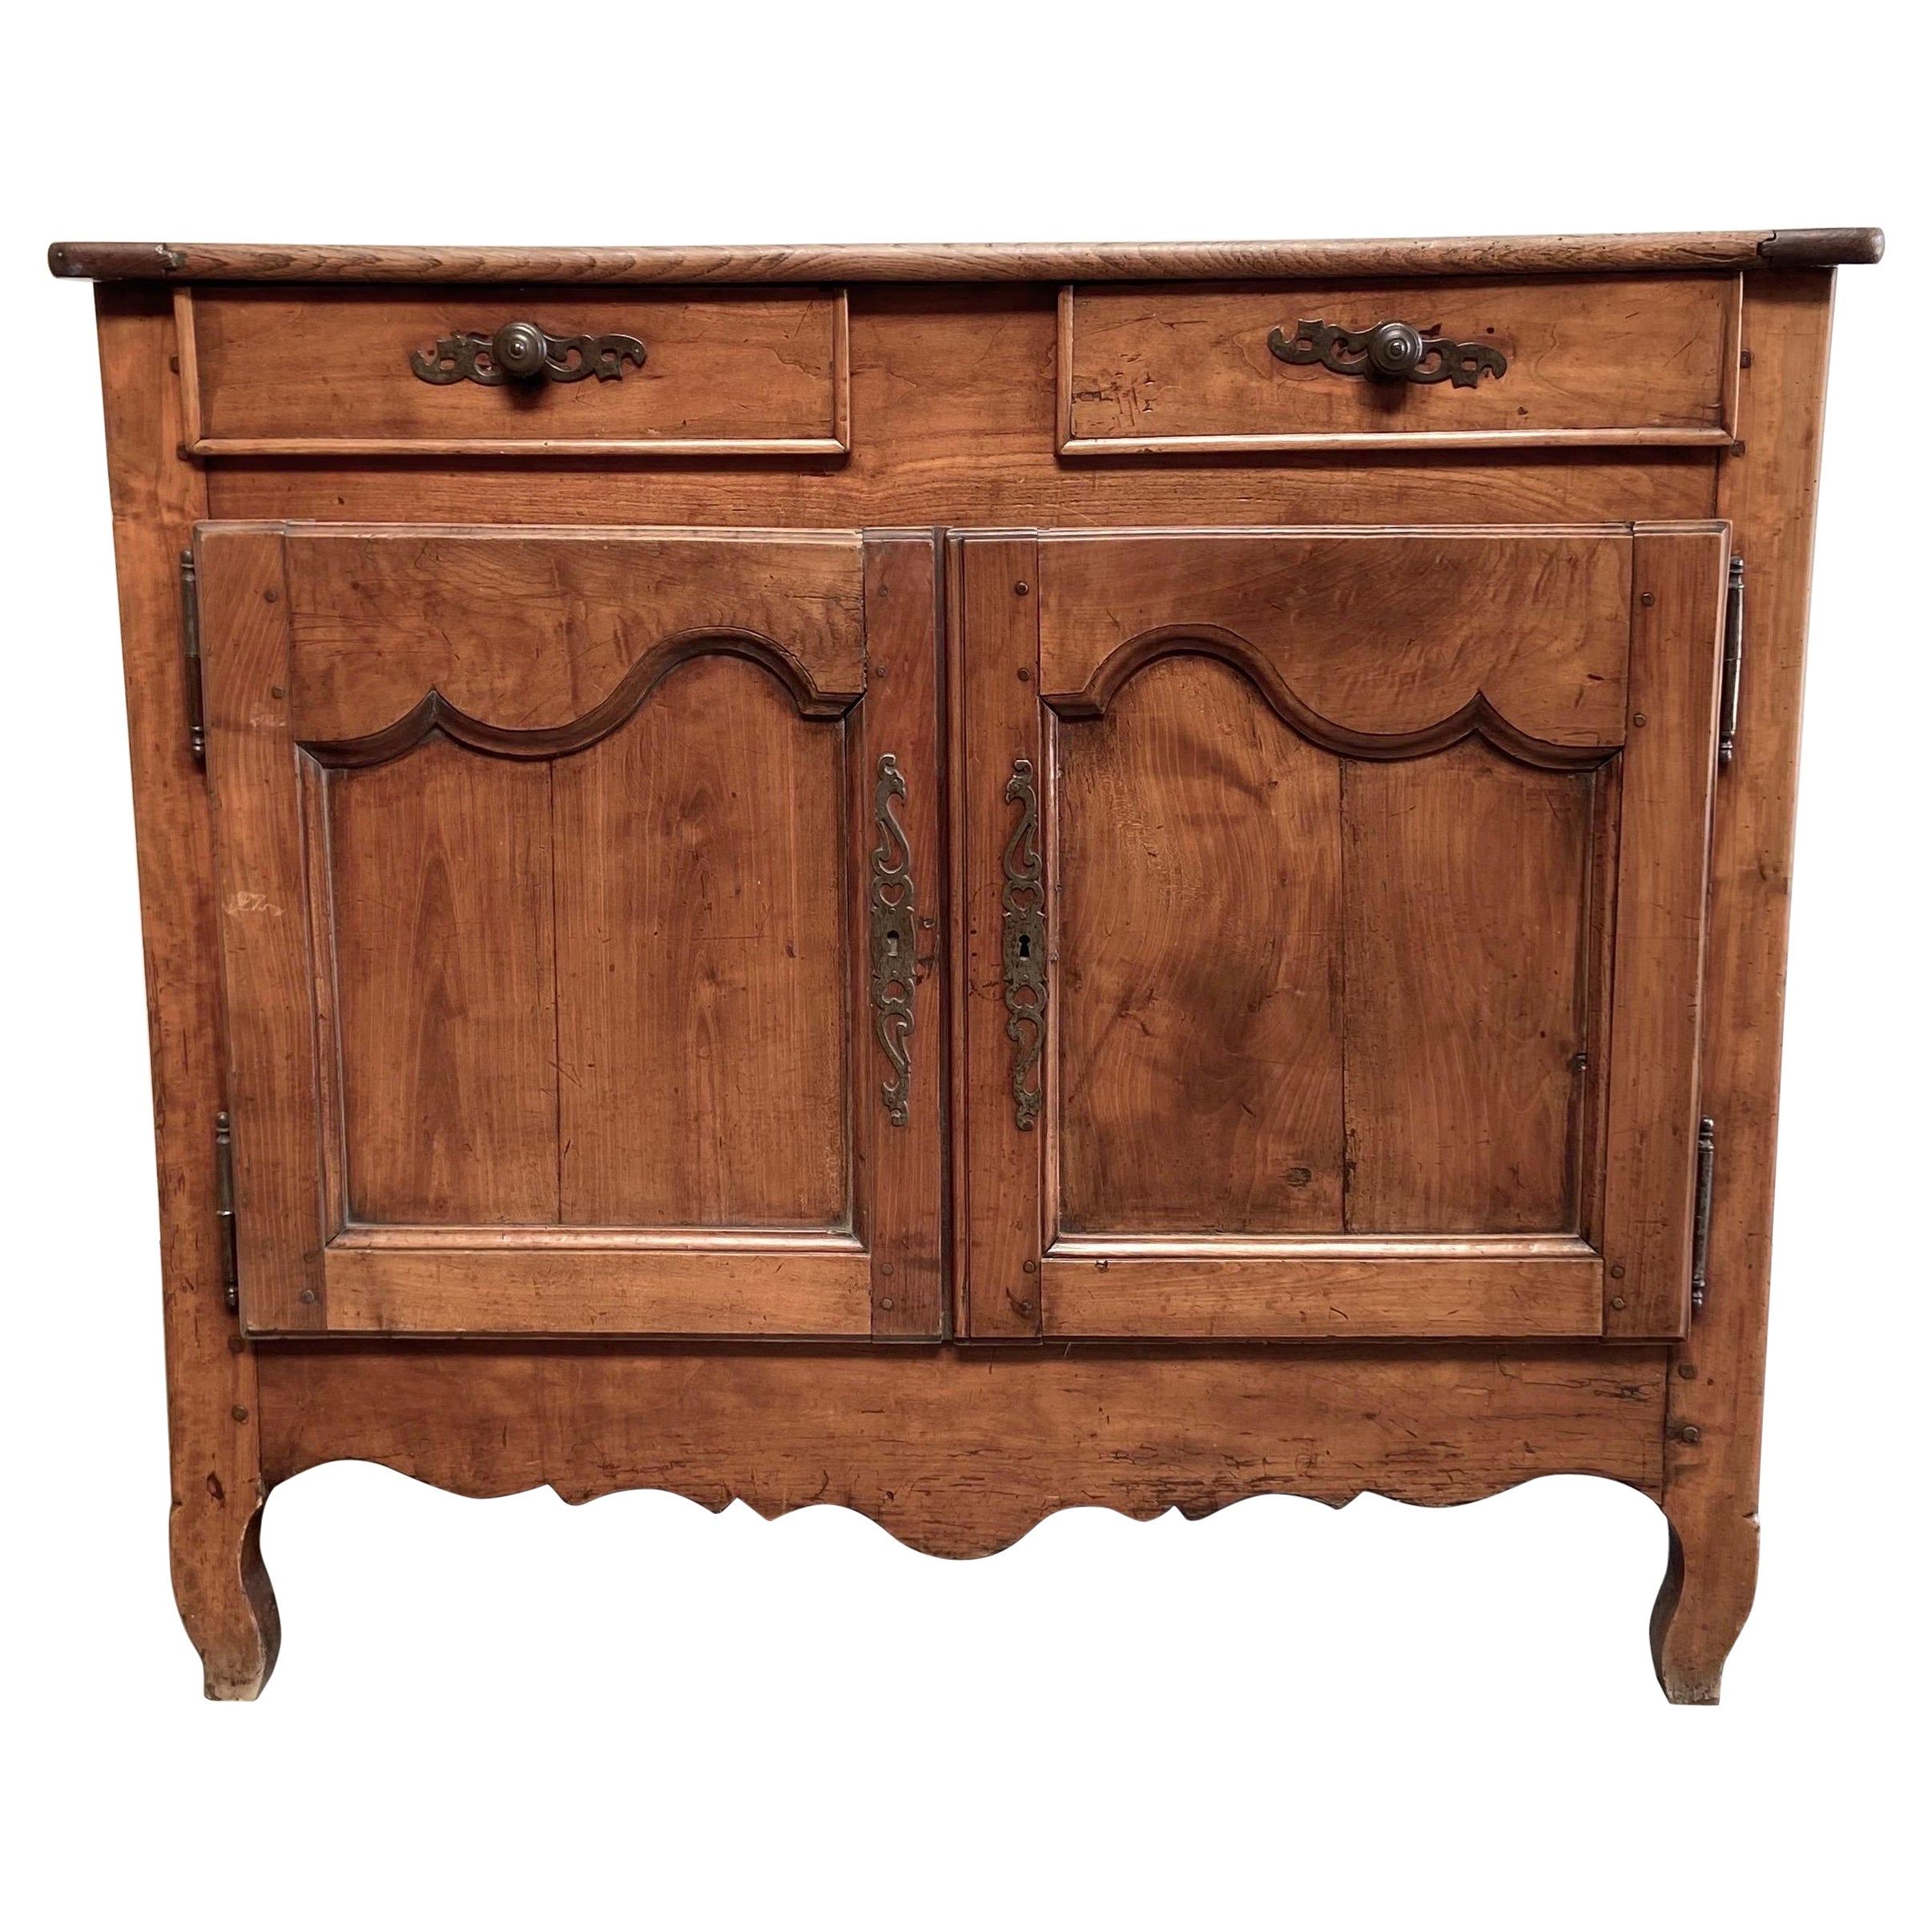 French Early 19th Century Transition Style Walnut Buffet with Doors and Drawers